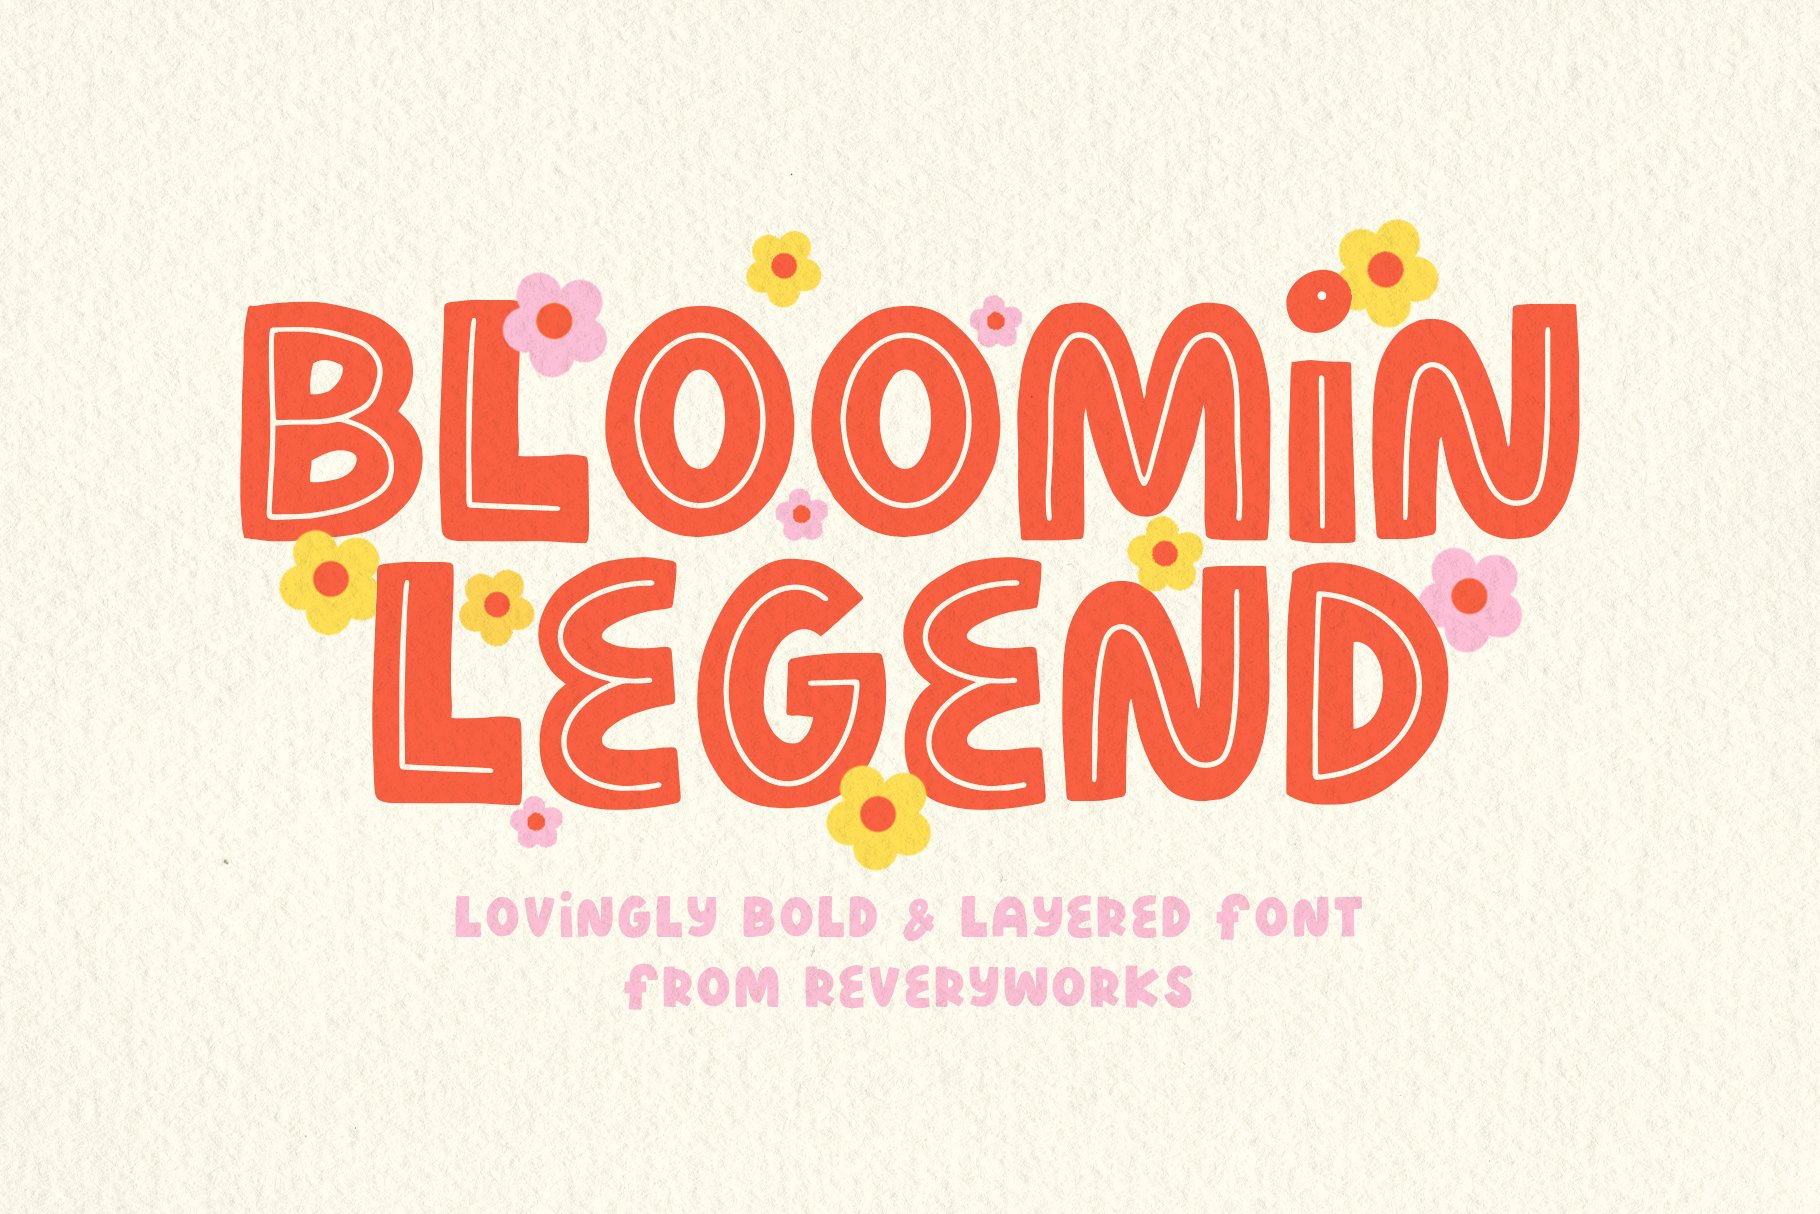 Blooming Legend Layered Font cover image.